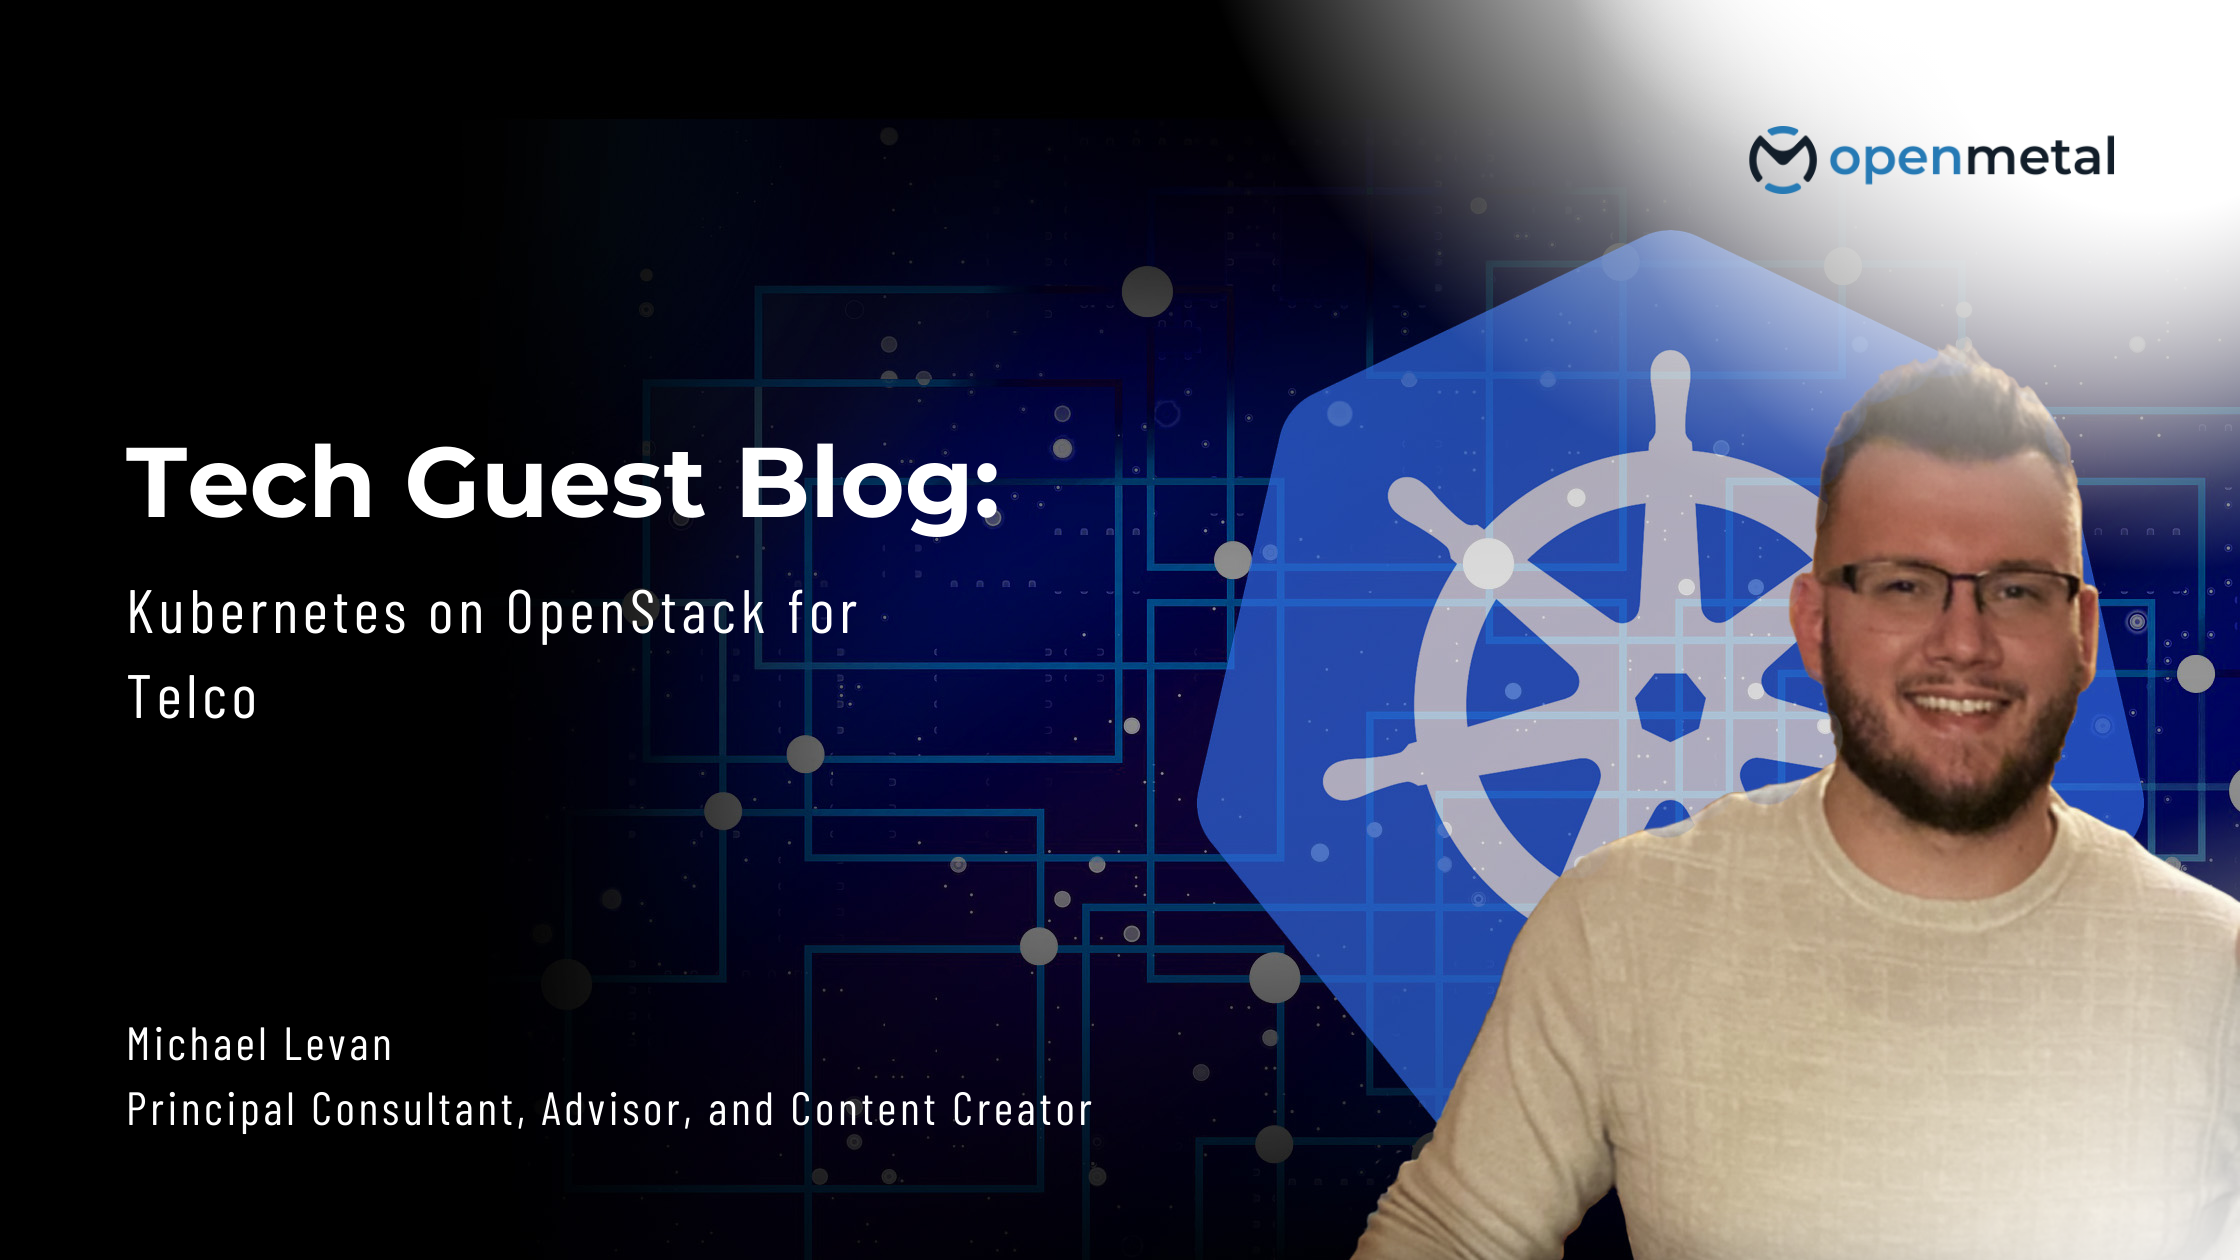 Kubernetes on OpenStack for Telco